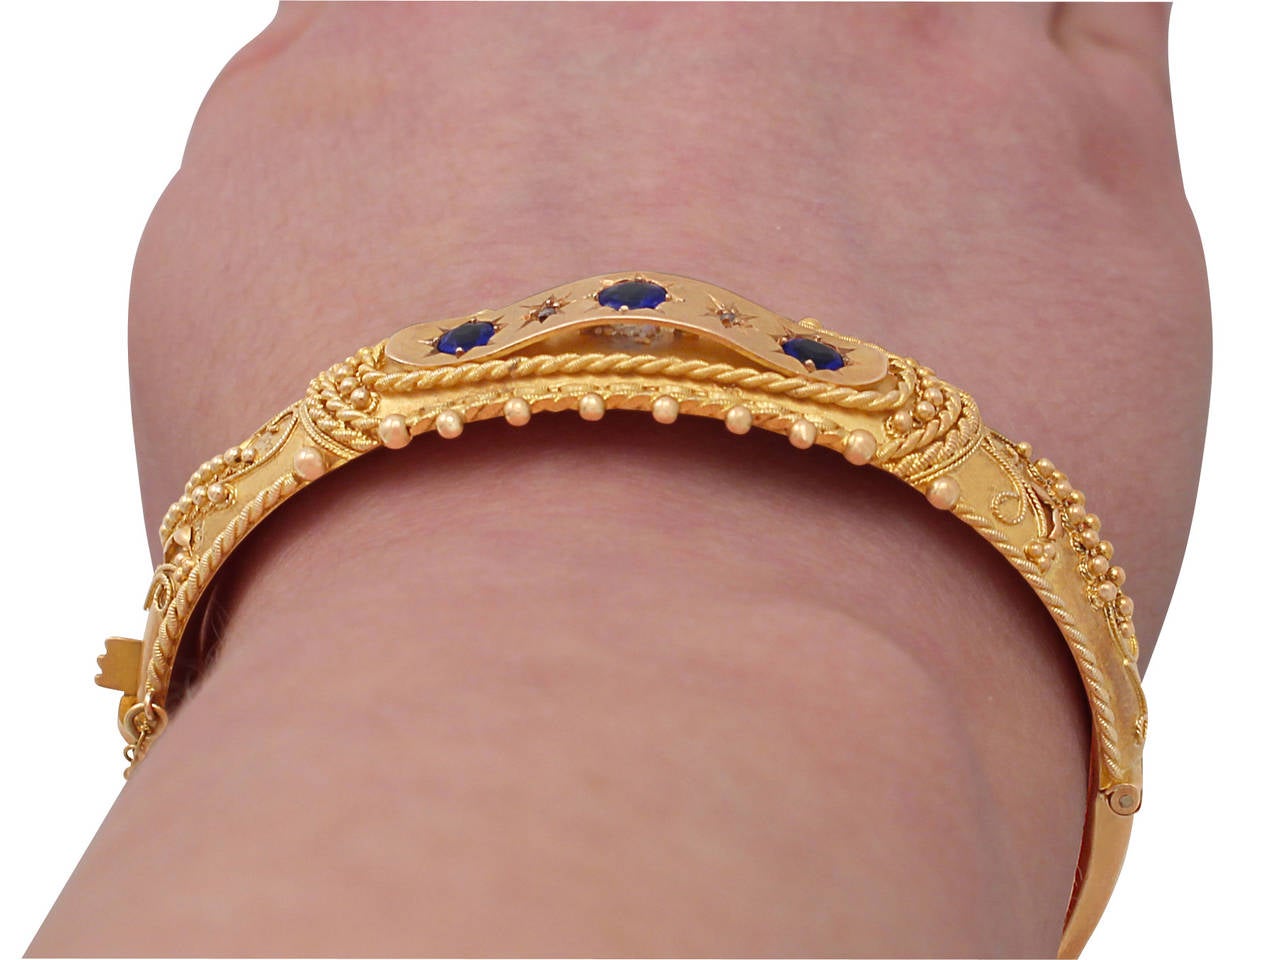 Garnet and Diamond, 9k Yellow and Rose Gold Bangle - Antique 1915 5